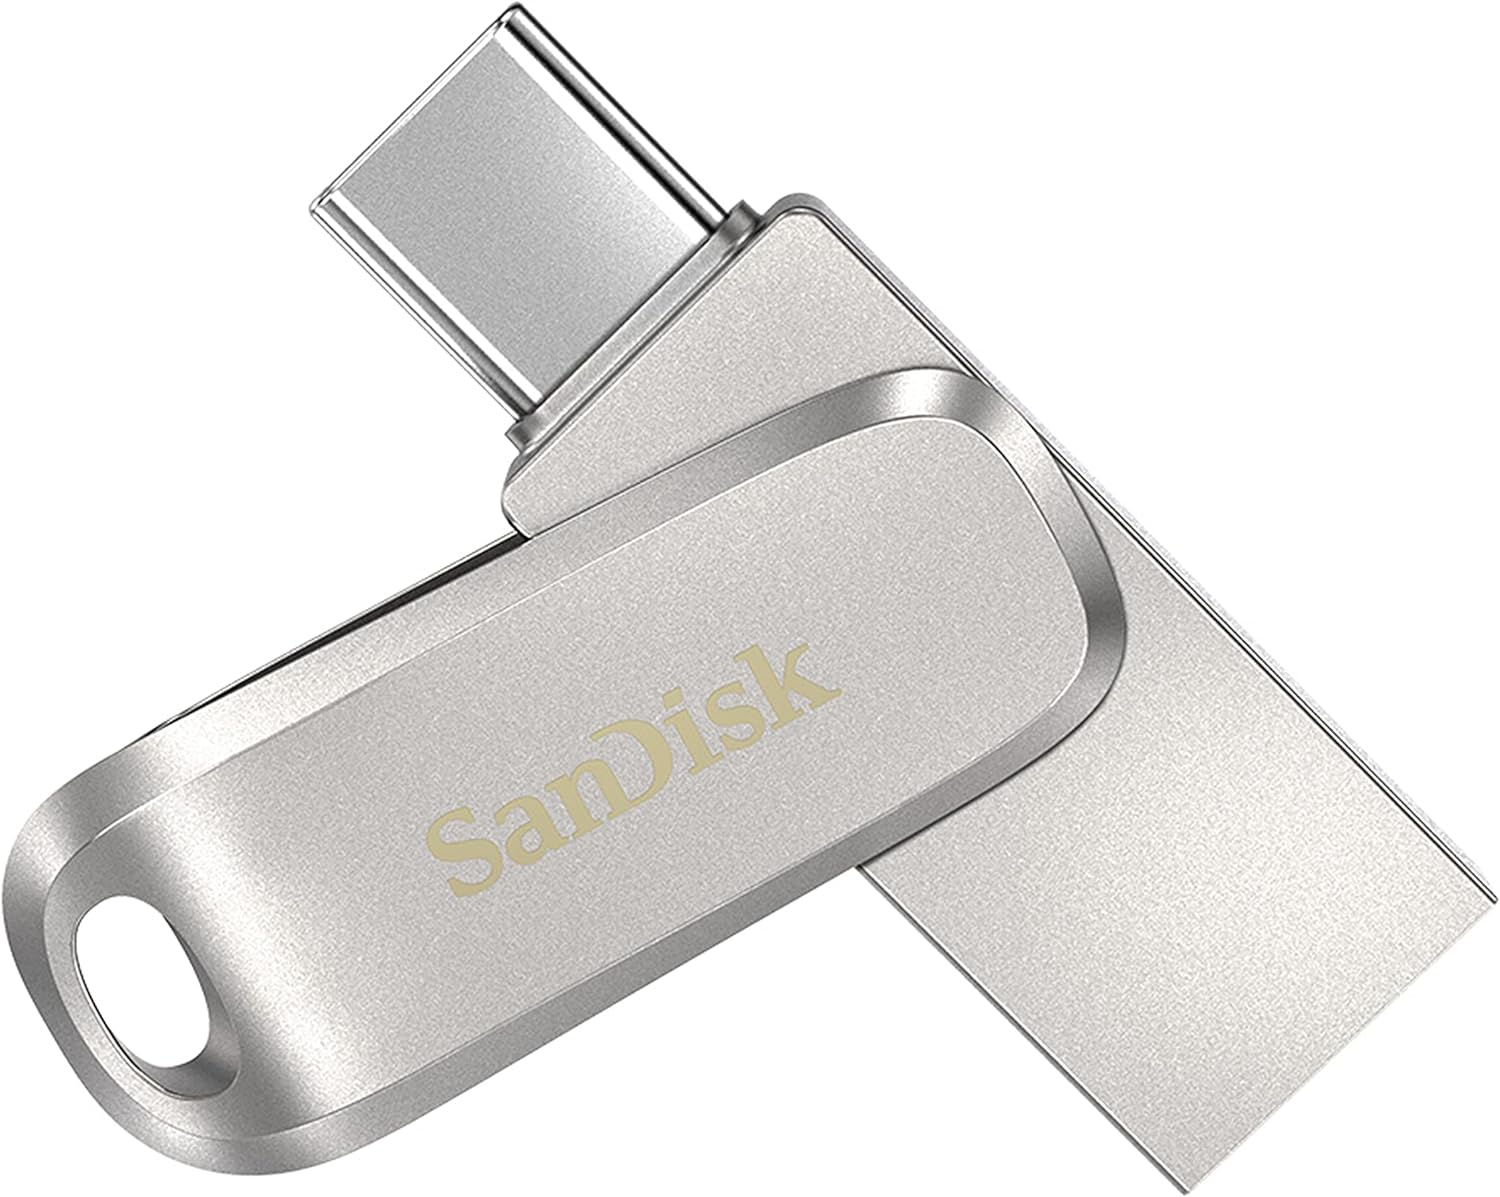 SanDisk 512GB Ultra Dual Drive Luxe USB Type-C - SDDDC4-512G-G46, Silver